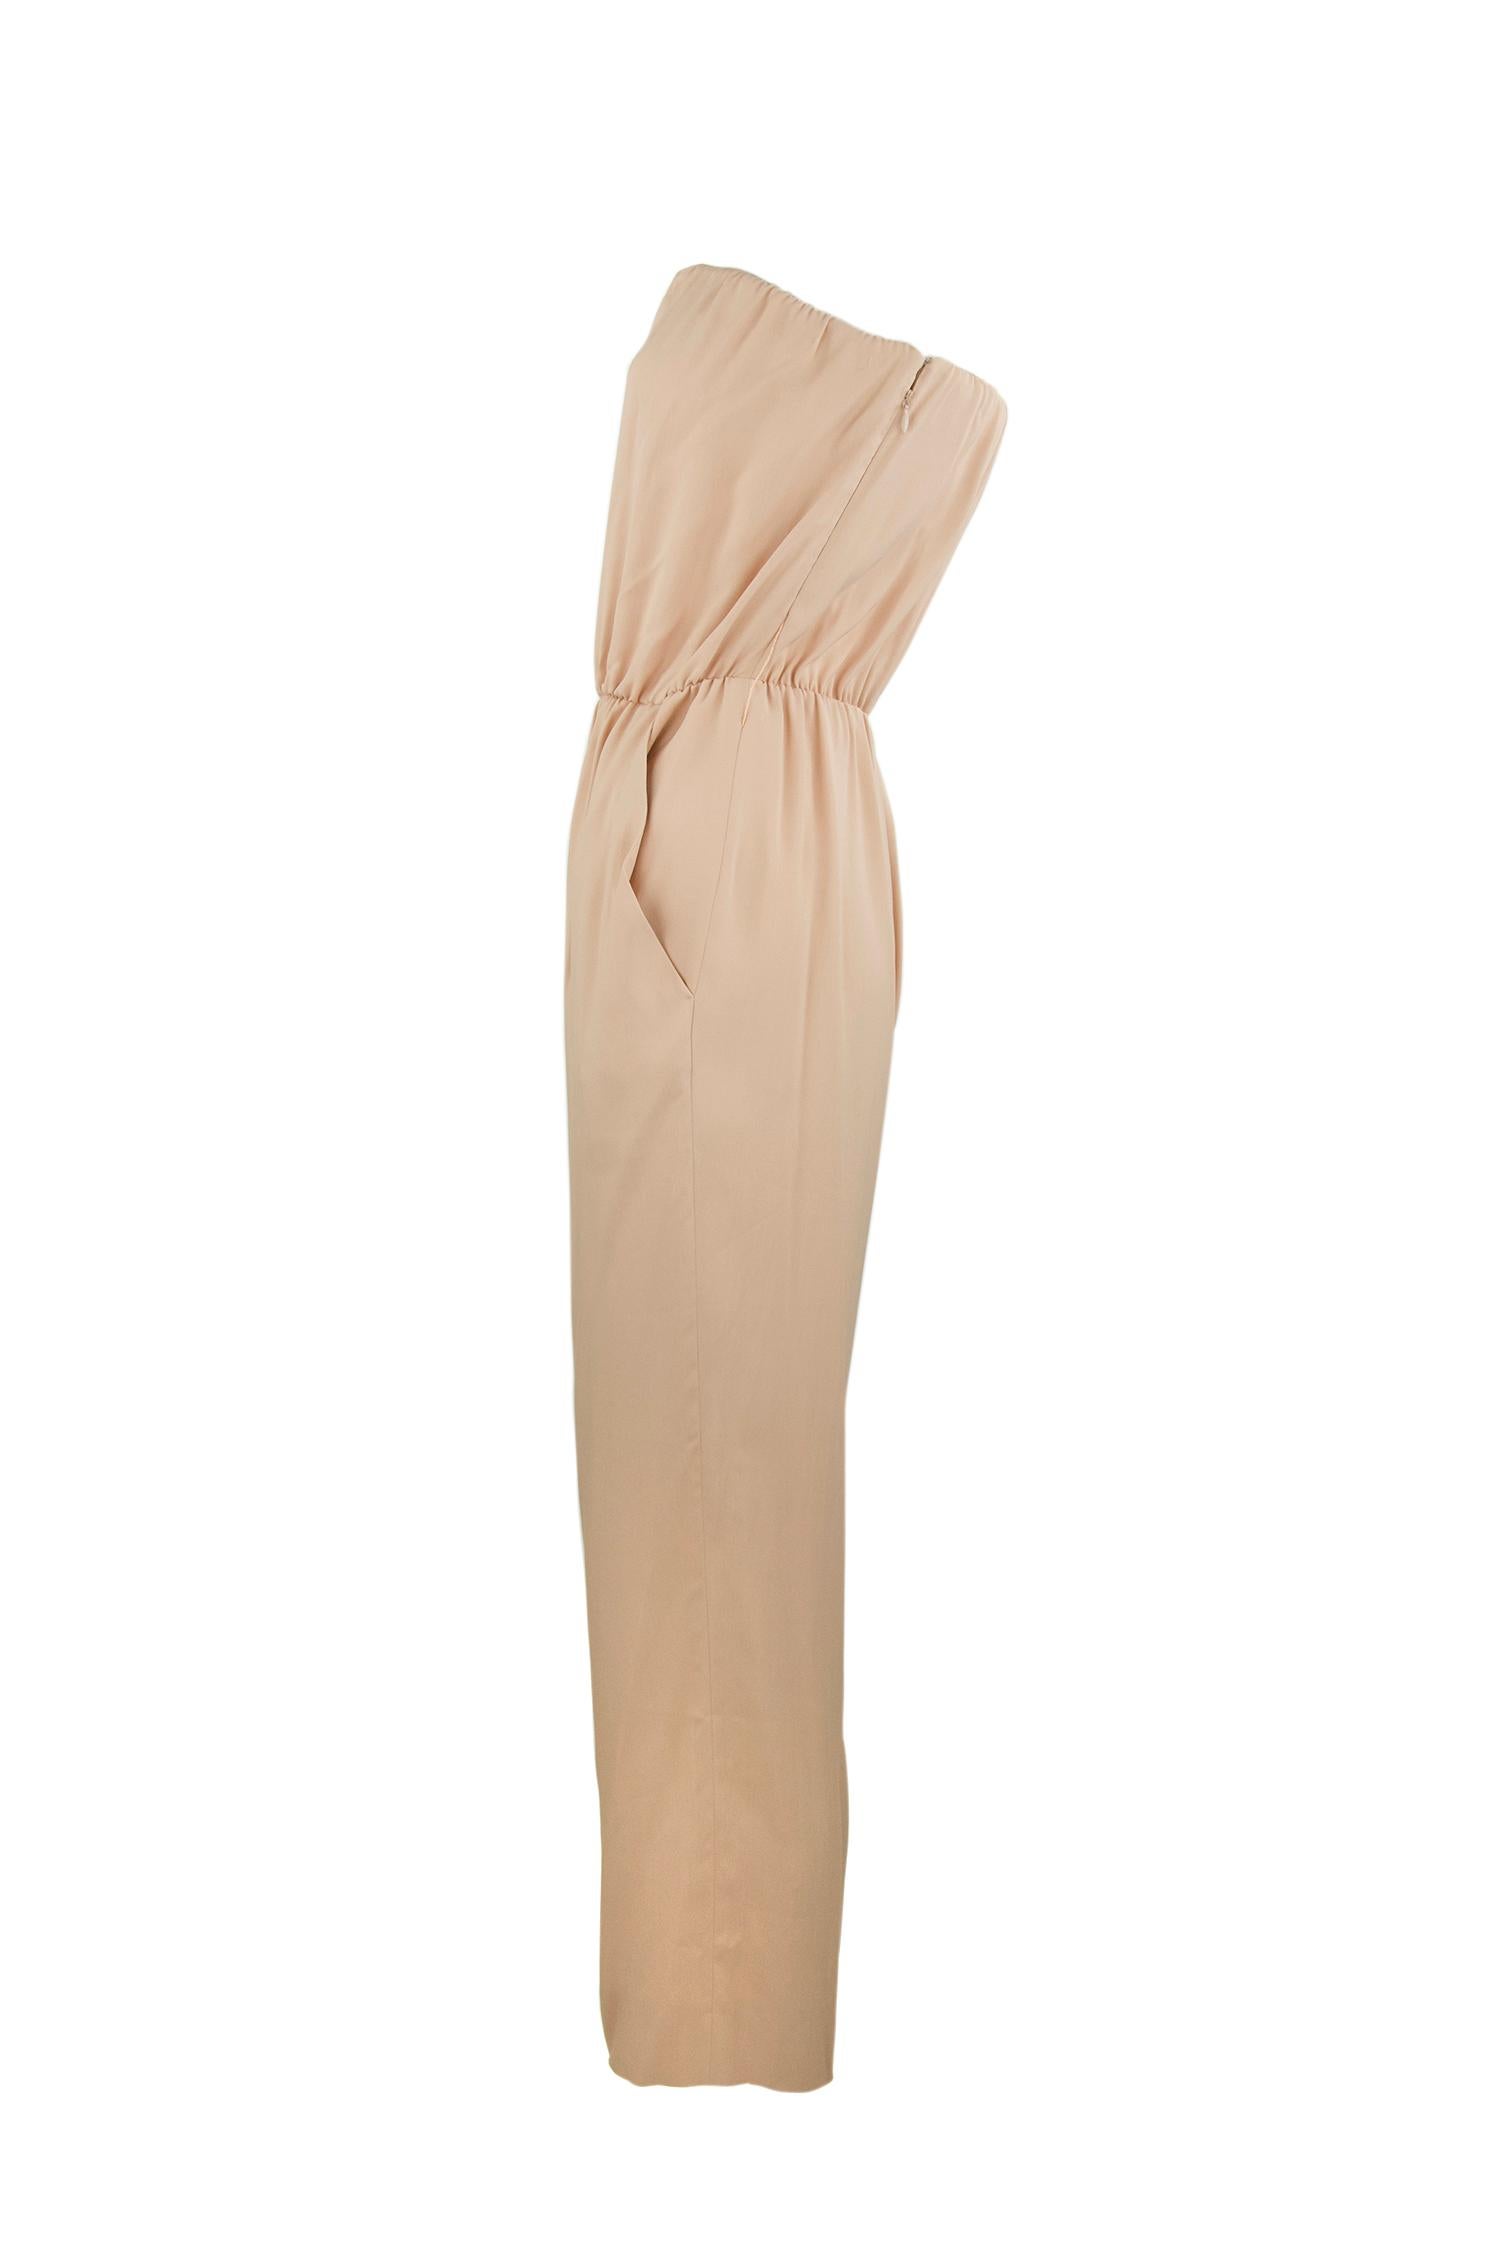 Sporty light pink strapless jumpsuit with an elastic top and waistline.  Looks great styled with pumps and long earrings.

Size: Size tag missing but approximate M

Condition: Pristine

Composition: 72% rayon, 24% silk, 4% spandex / lining 100%